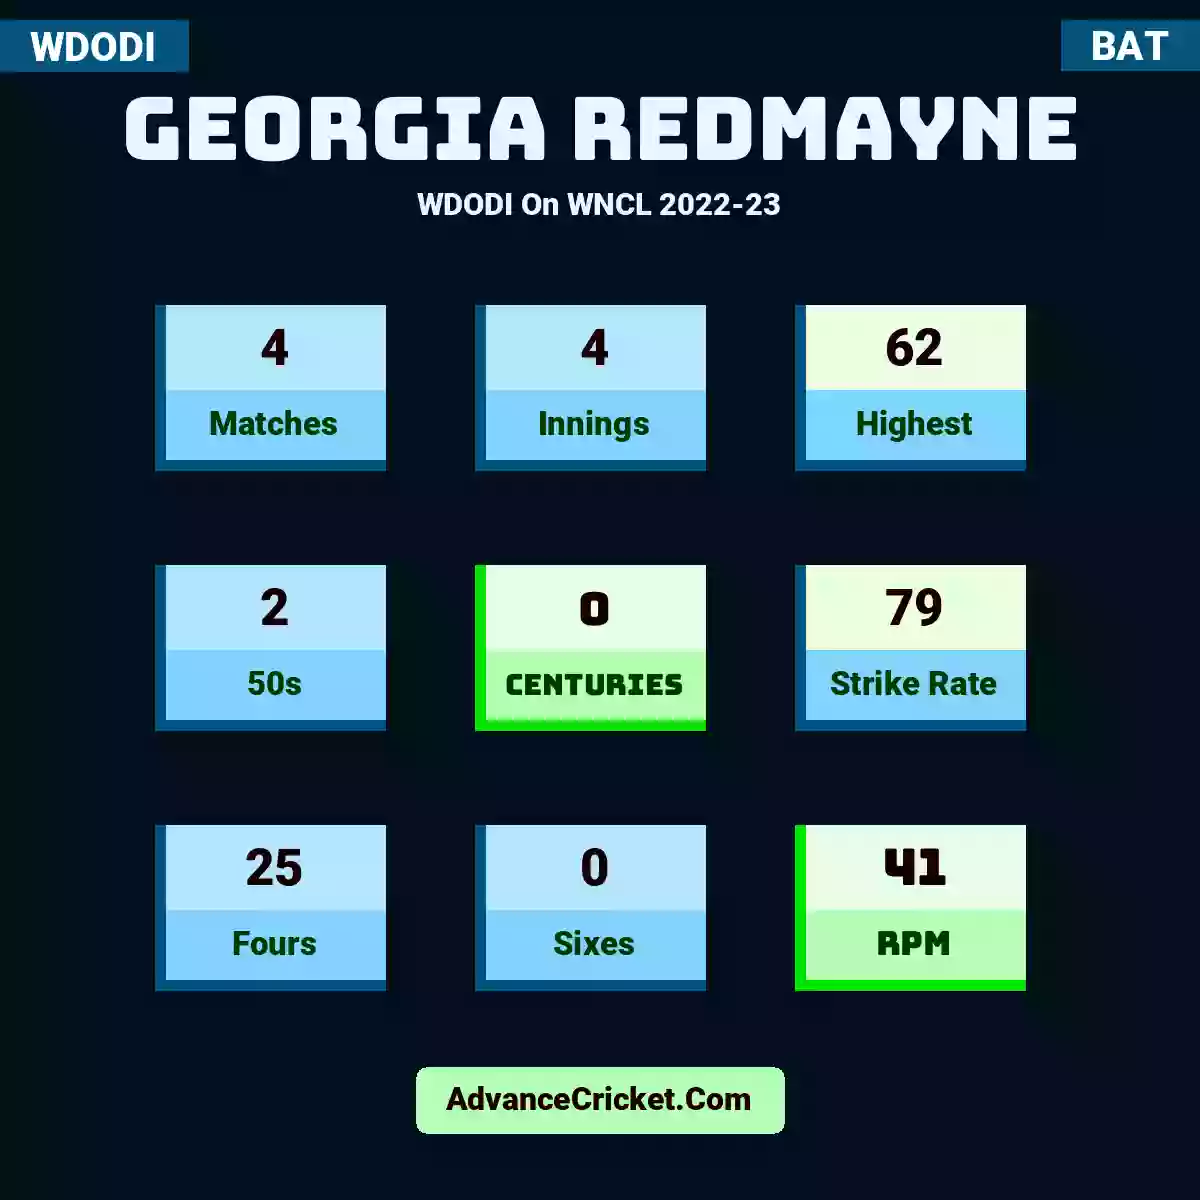 Georgia Redmayne WDODI  On WNCL 2022-23, Georgia Redmayne played 4 matches, scored 62 runs as highest, 2 half-centuries, and 0 centuries, with a strike rate of 79. G.Redmayne hit 25 fours and 0 sixes, with an RPM of 41.